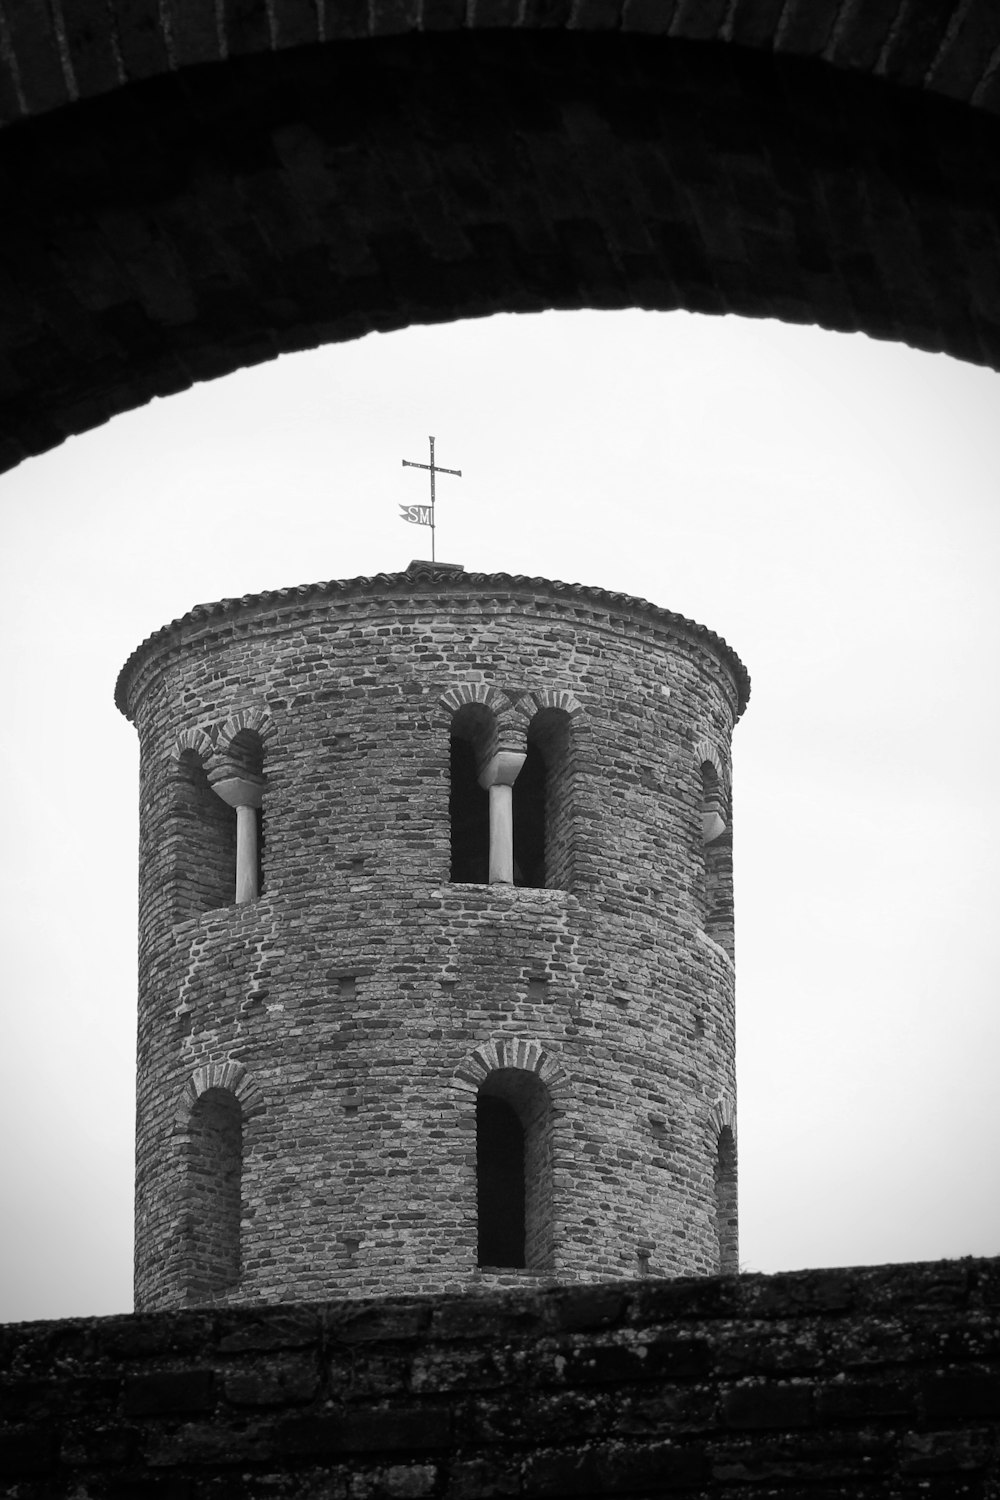 a black and white photo of a tower with a cross on top